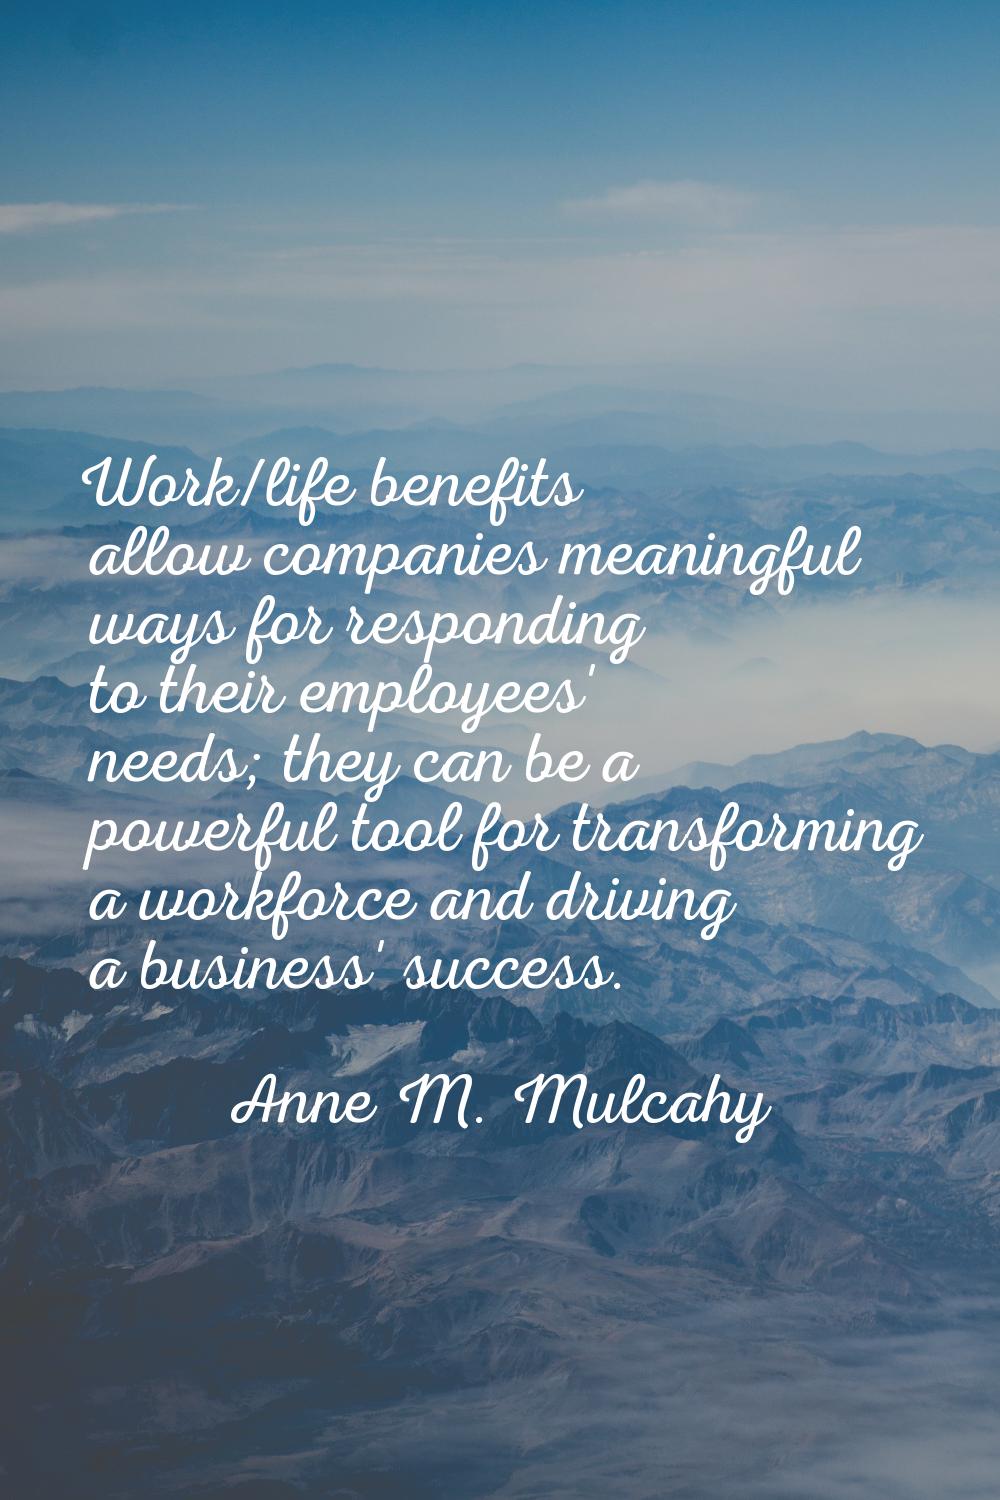 Work/life benefits allow companies meaningful ways for responding to their employees' needs; they c